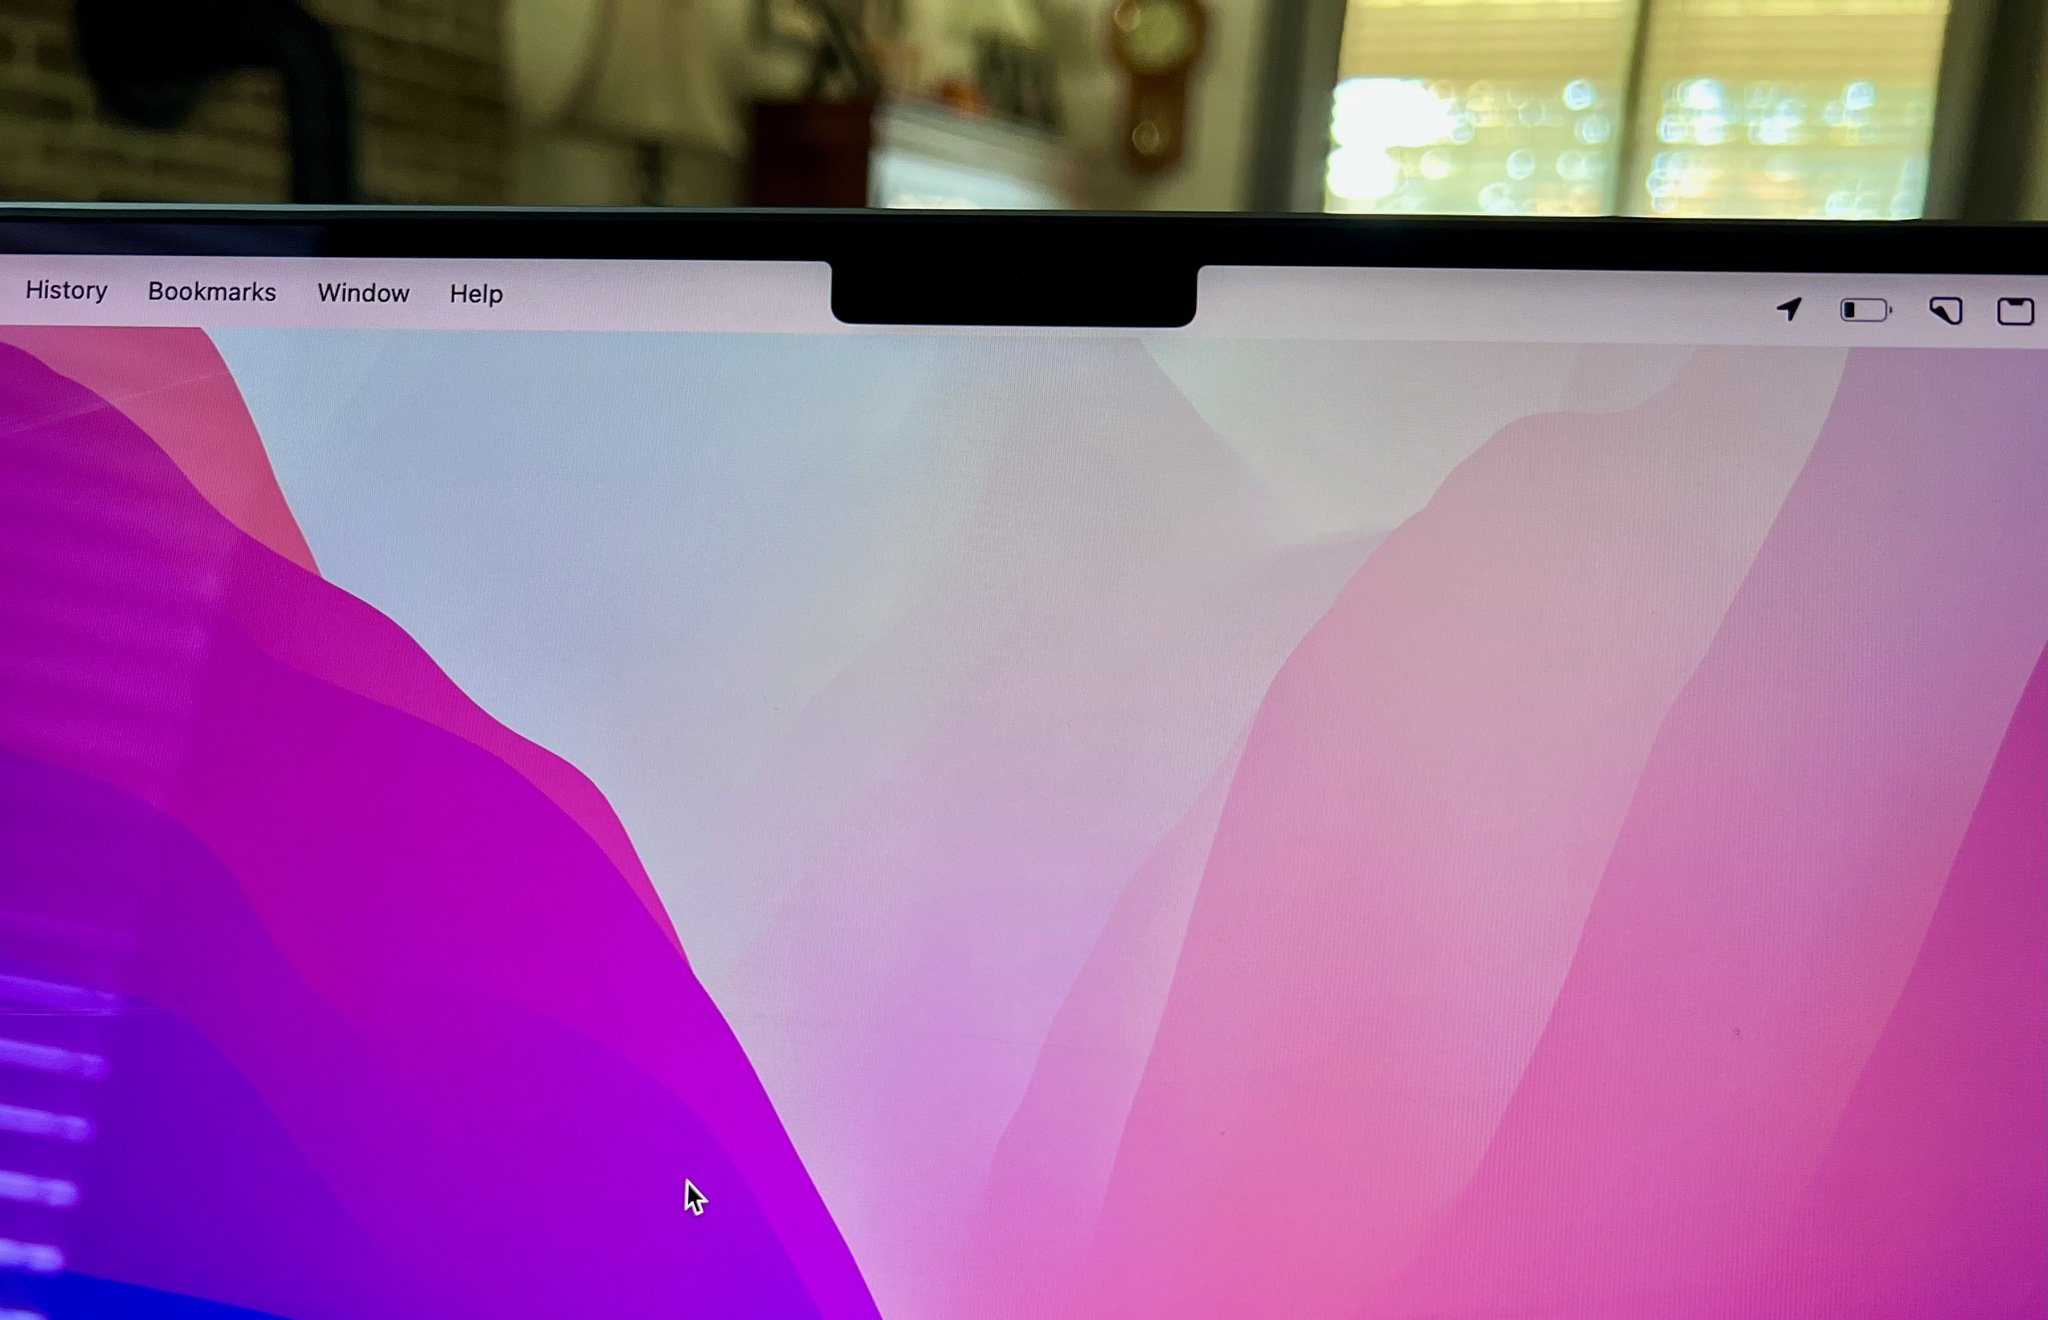 Yes, the notch is one of the best new features on the MacBook Pro